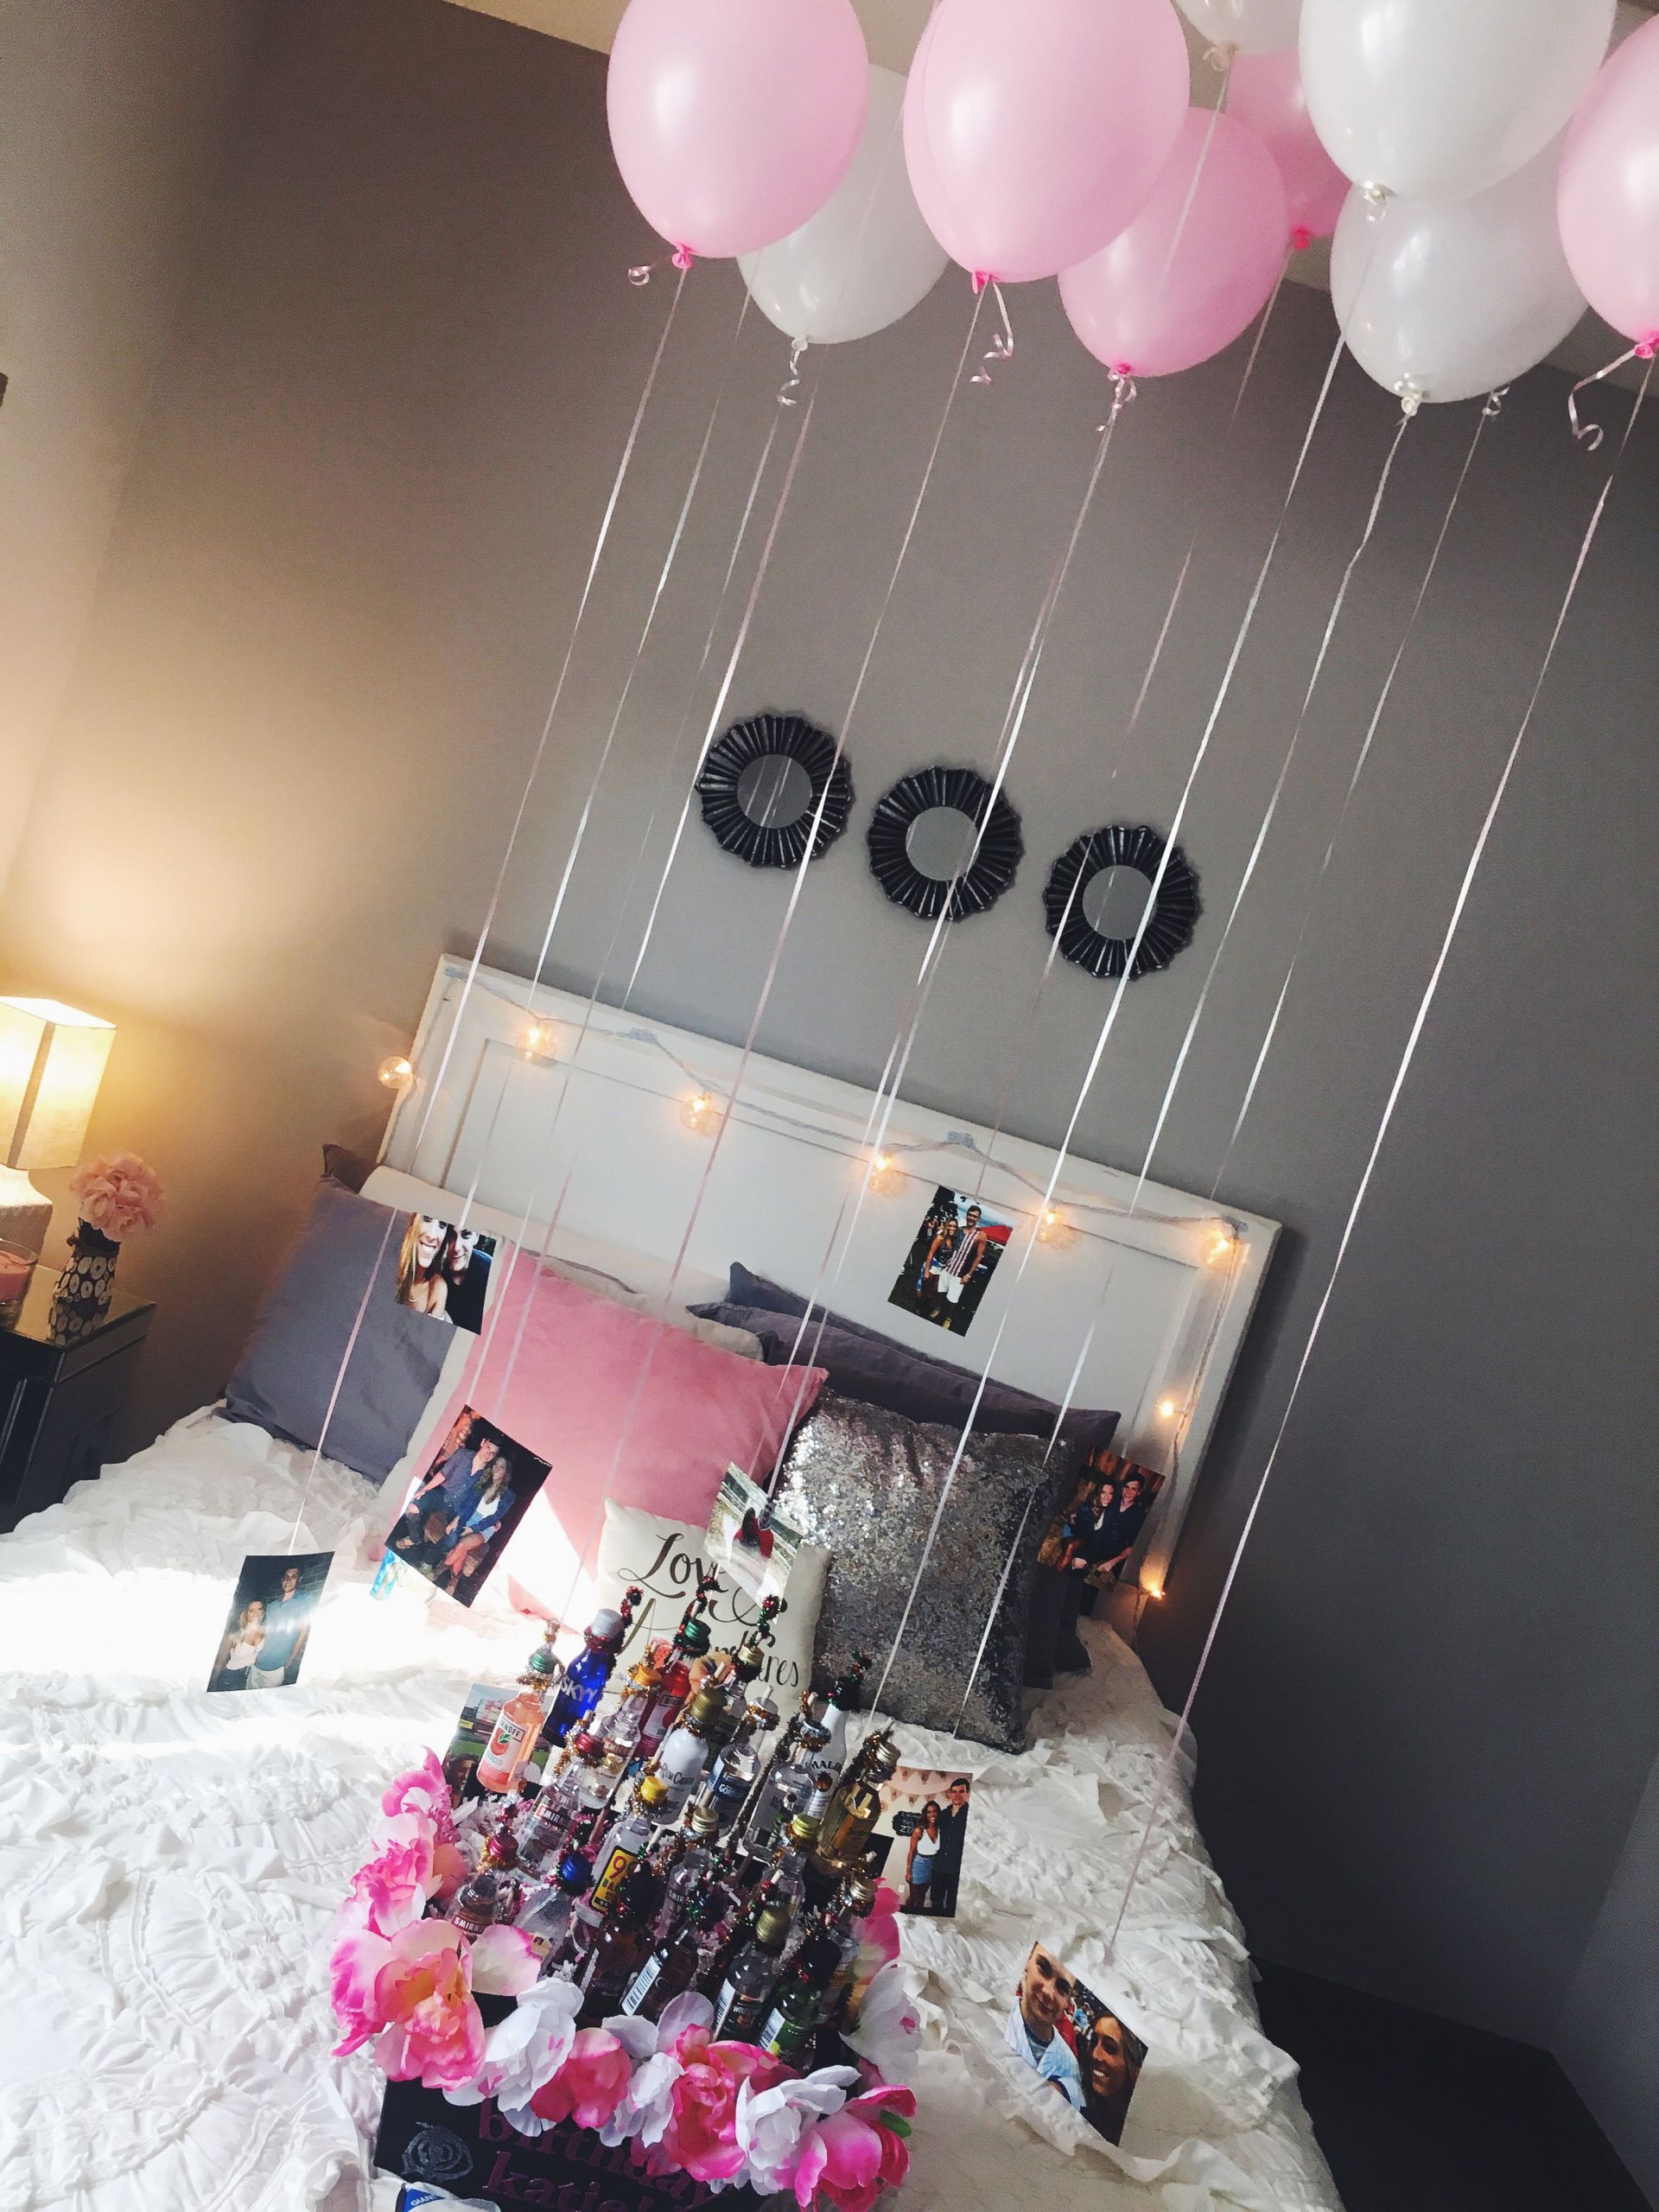 Best Gift Ideas For Girlfriend
 easy and cute decorations for a friend or girlfriends 21st